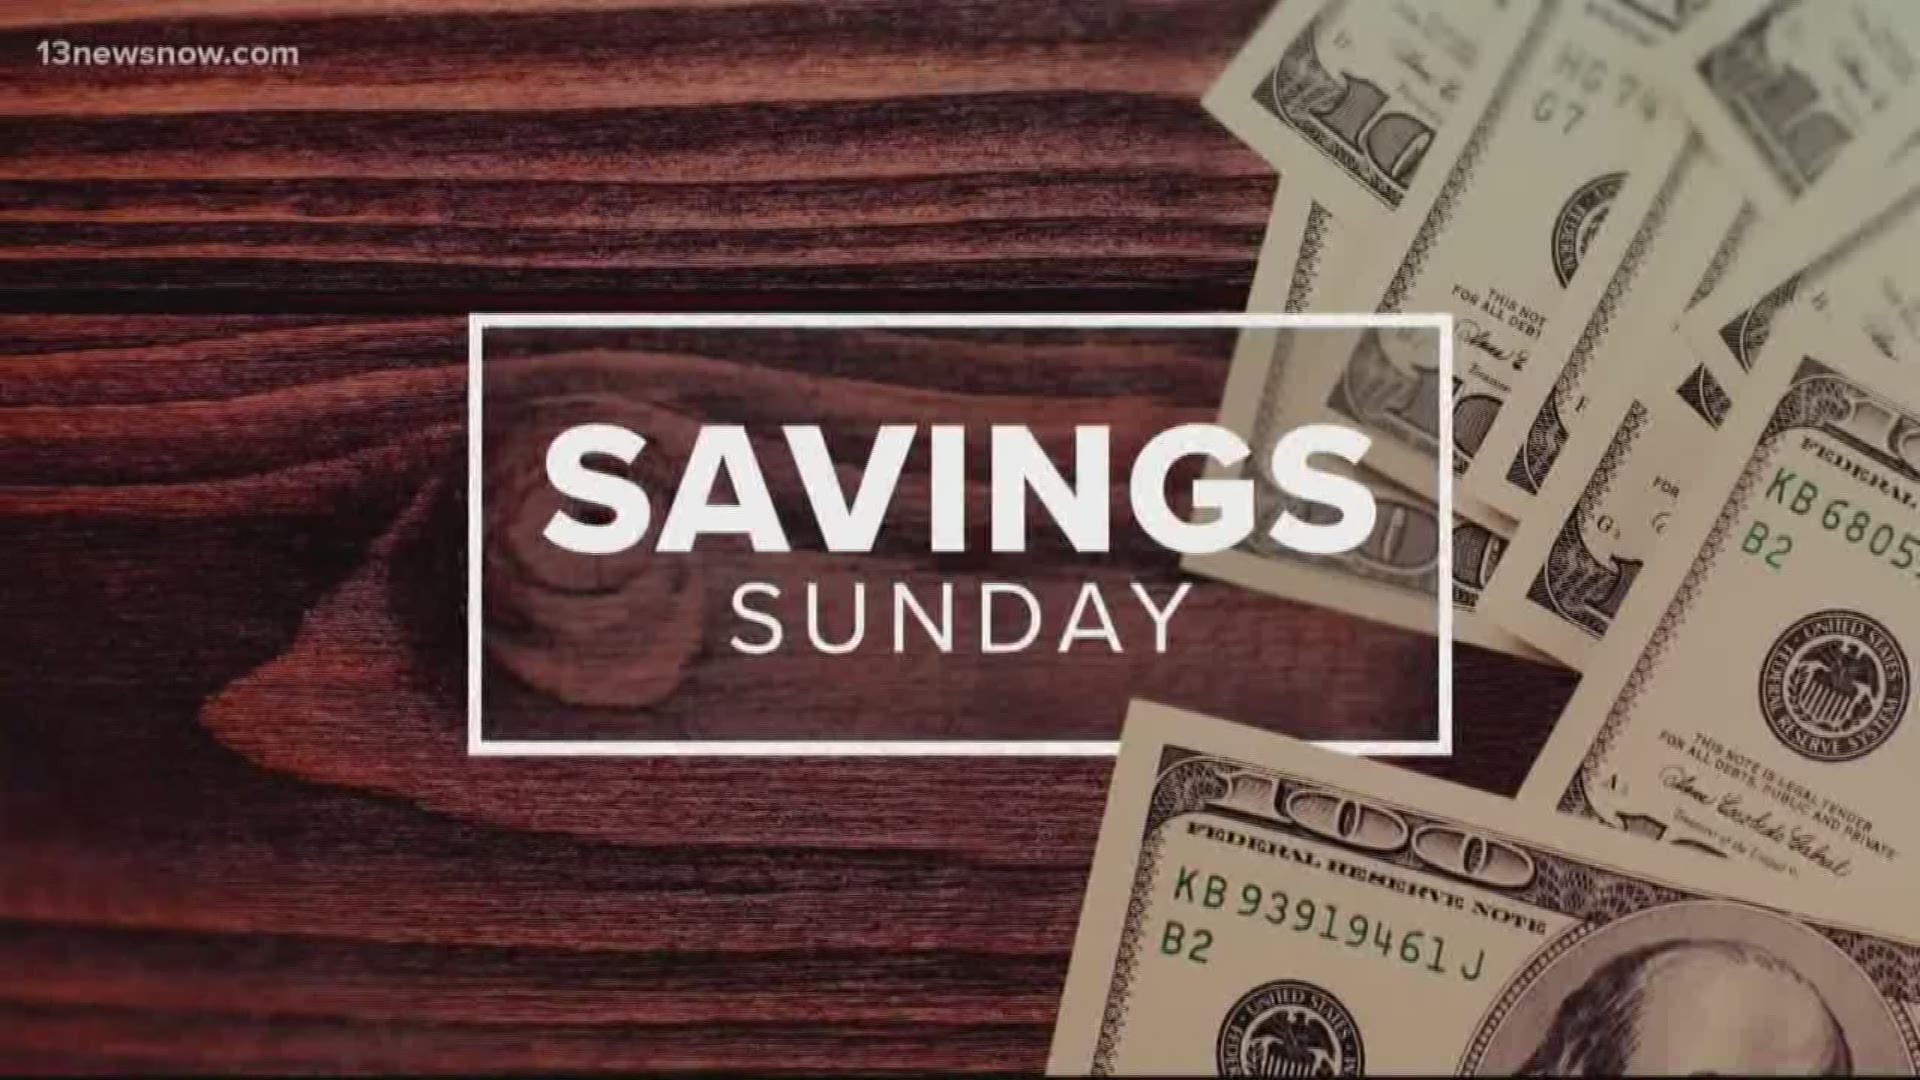 Laura Oliver from www.afrugalchick.com has your big savings for the week of March 24, 2019.